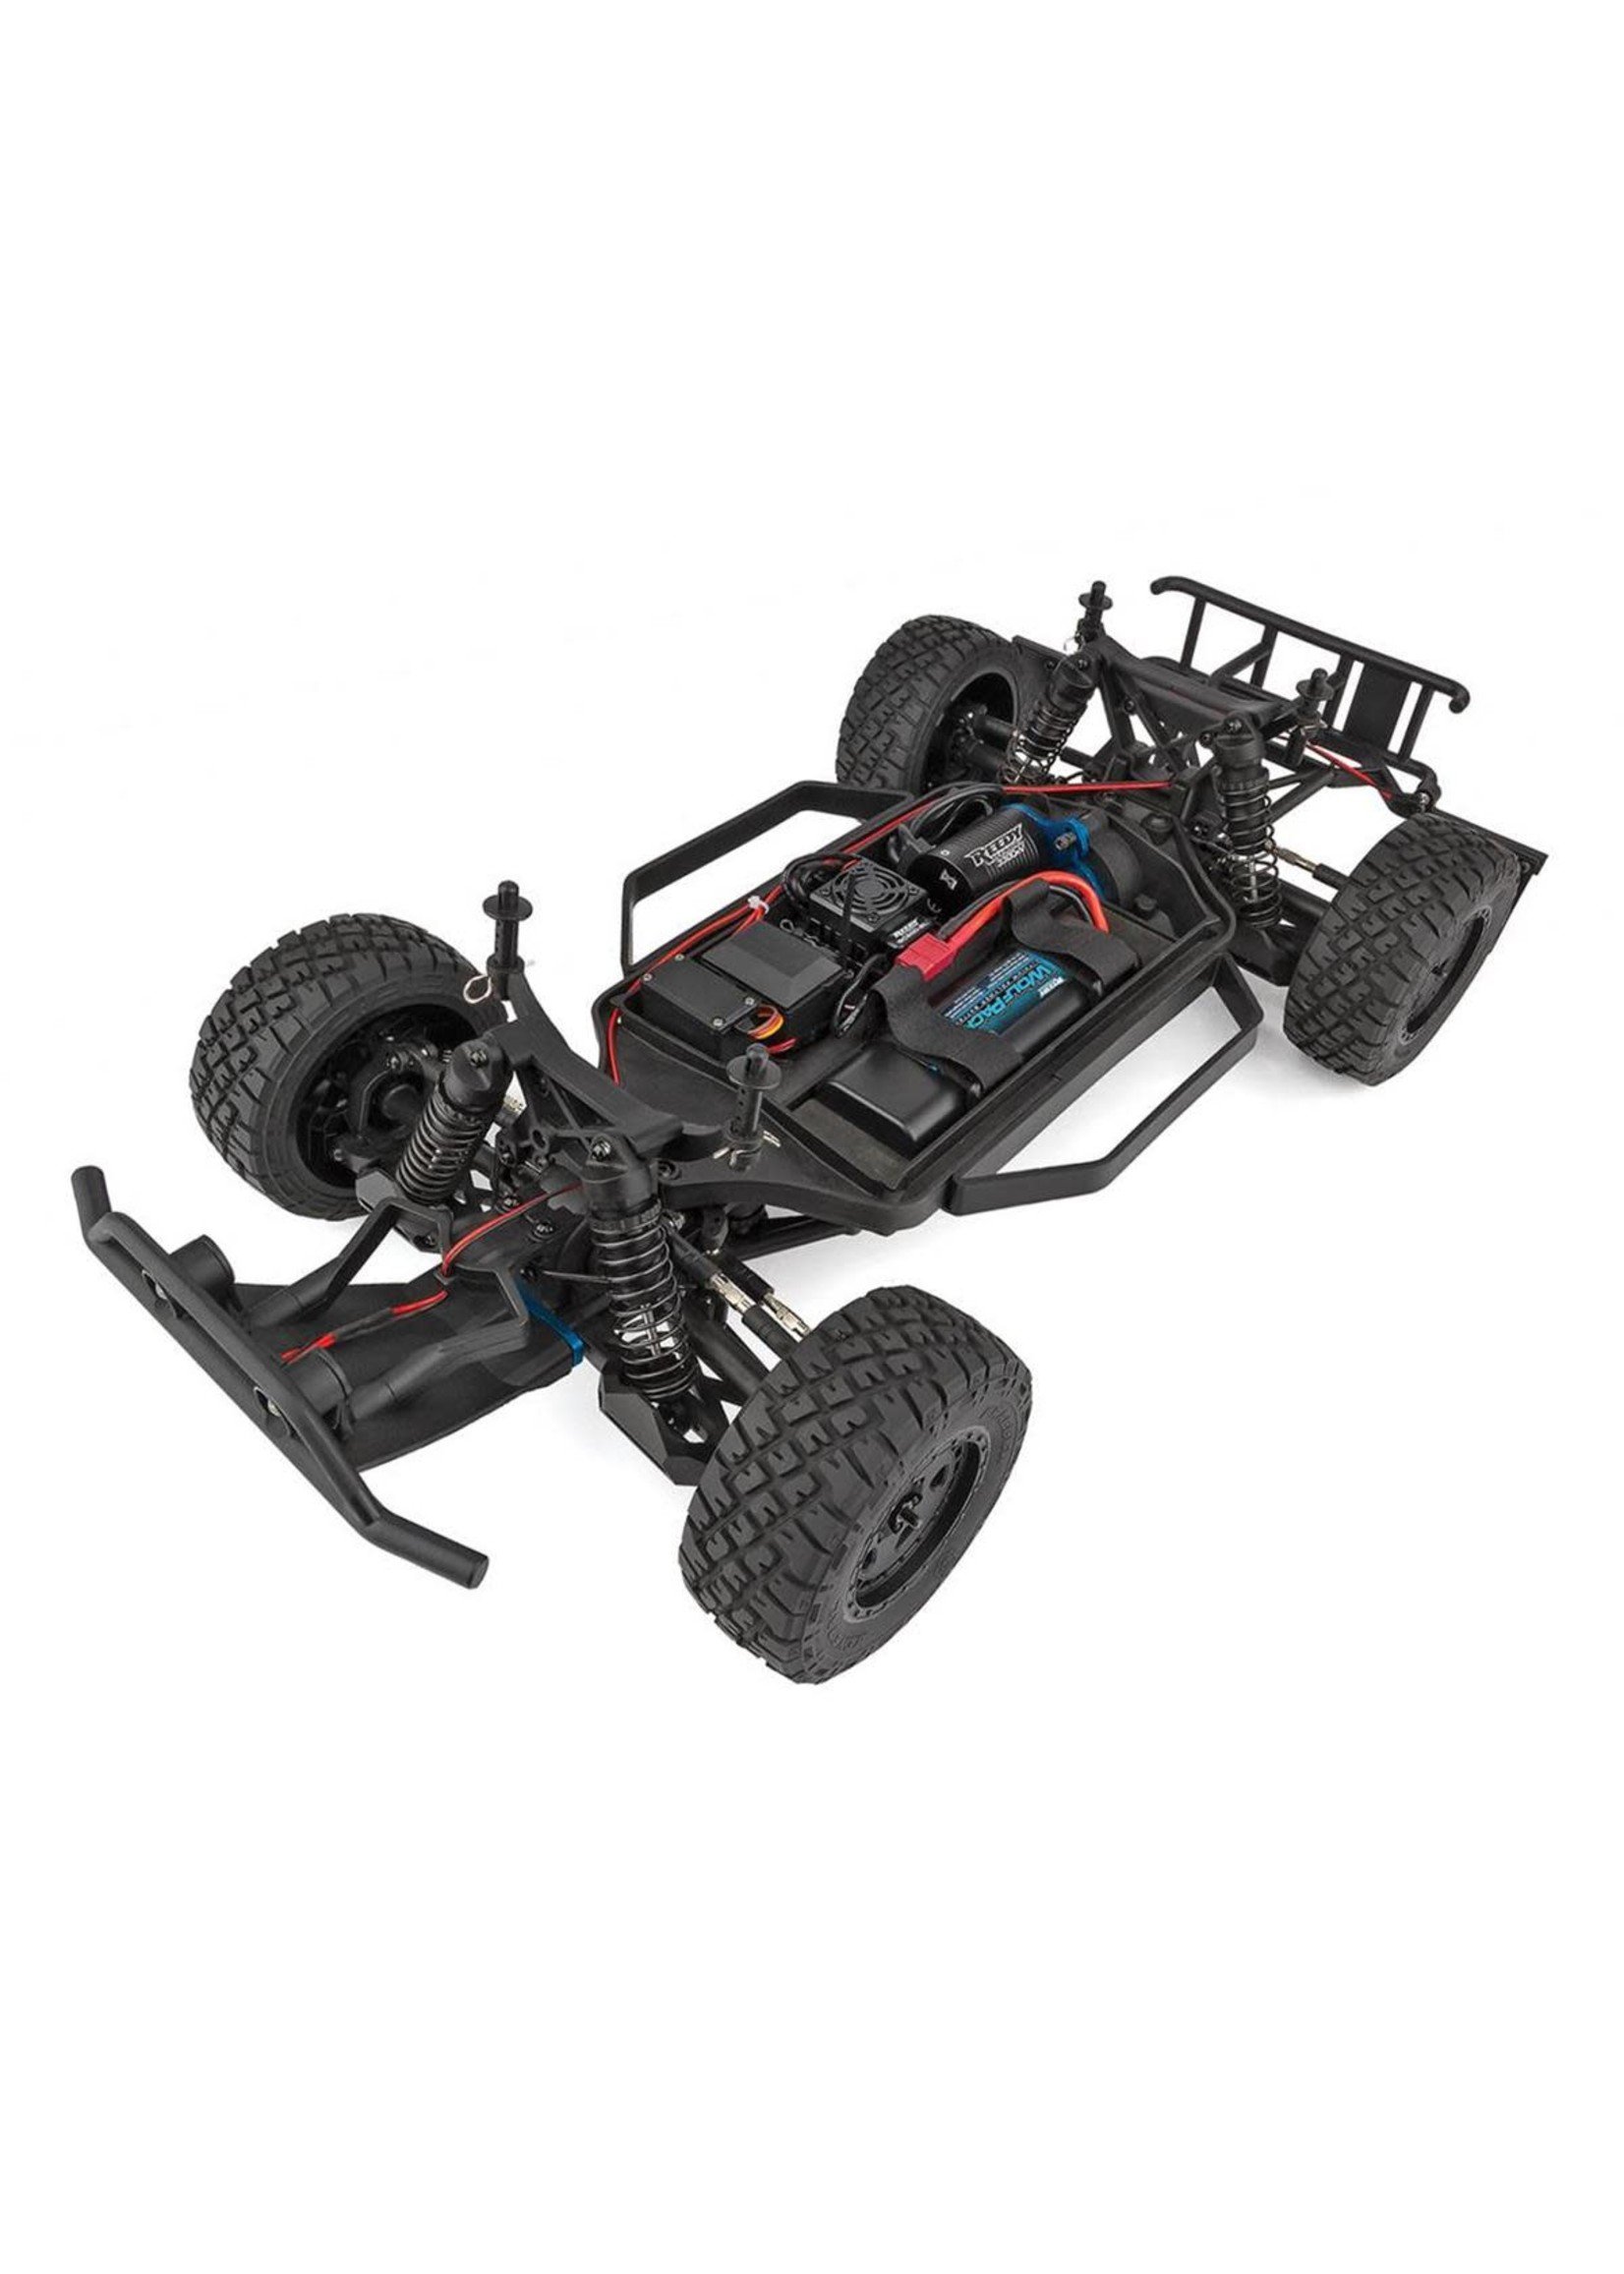 Team Associated ASC20531C Team Associated Pro4 SC10 1/10 RTR 4WD Brushless Short Course Truck Combo w/2.4GHz Radio, Battery & Charger (General Tire)